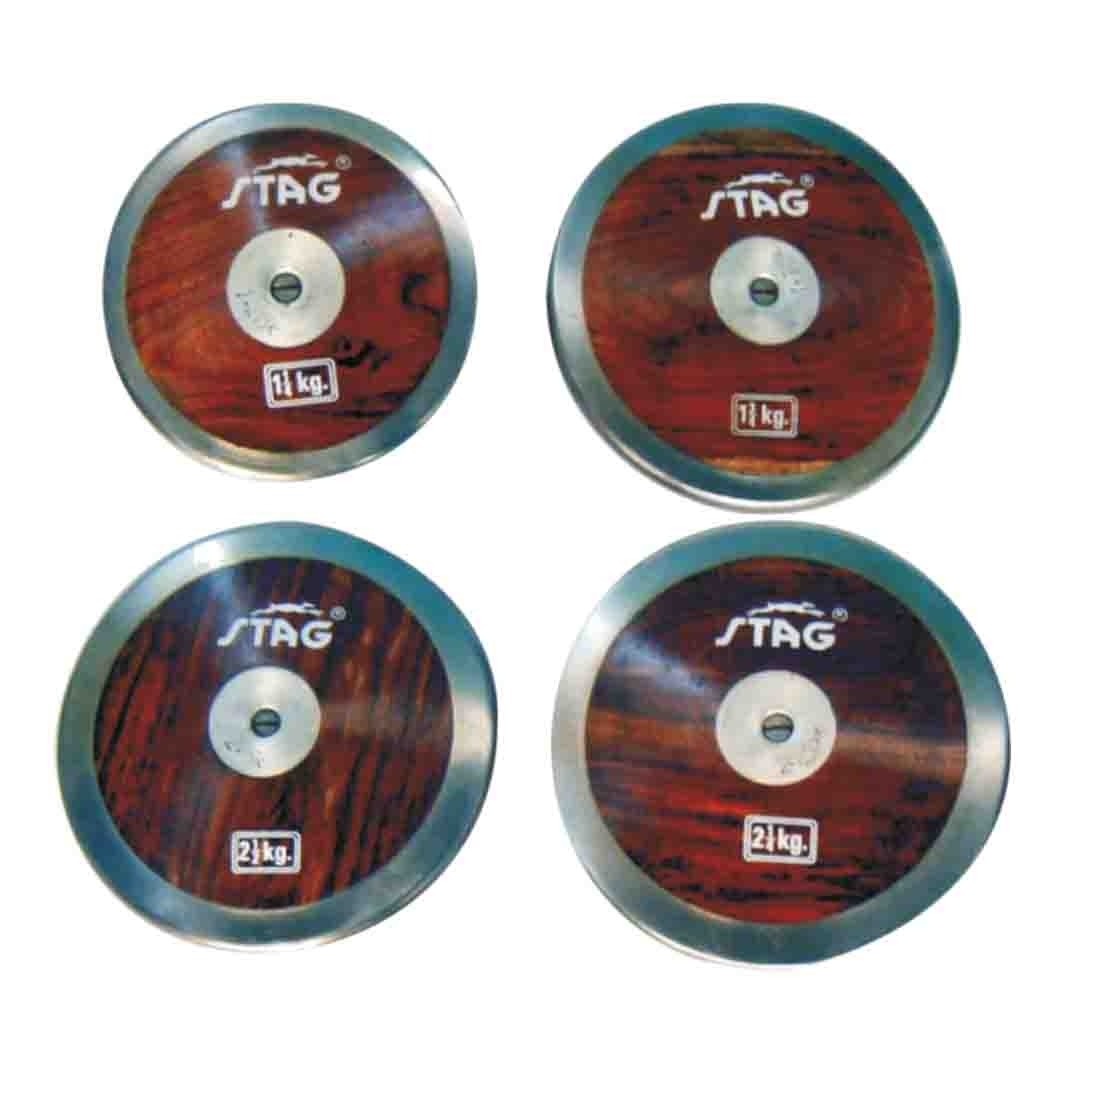 STAG DISCUS SUPERIOR HARD WOOD WITH STEEL RIM 1 KG